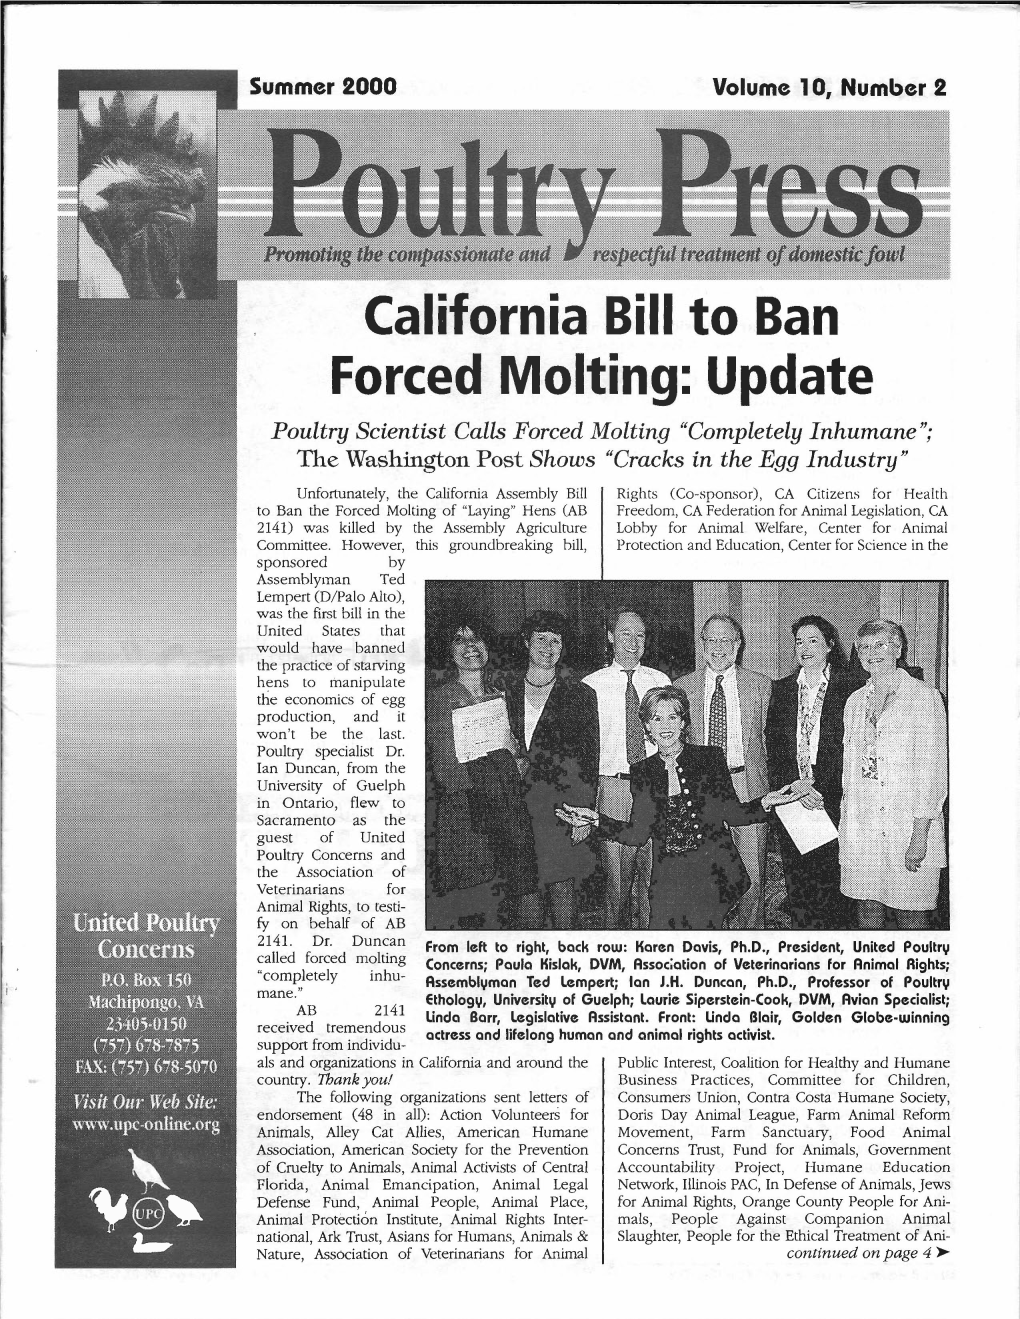 UPC Summer 2000 Poultry Press